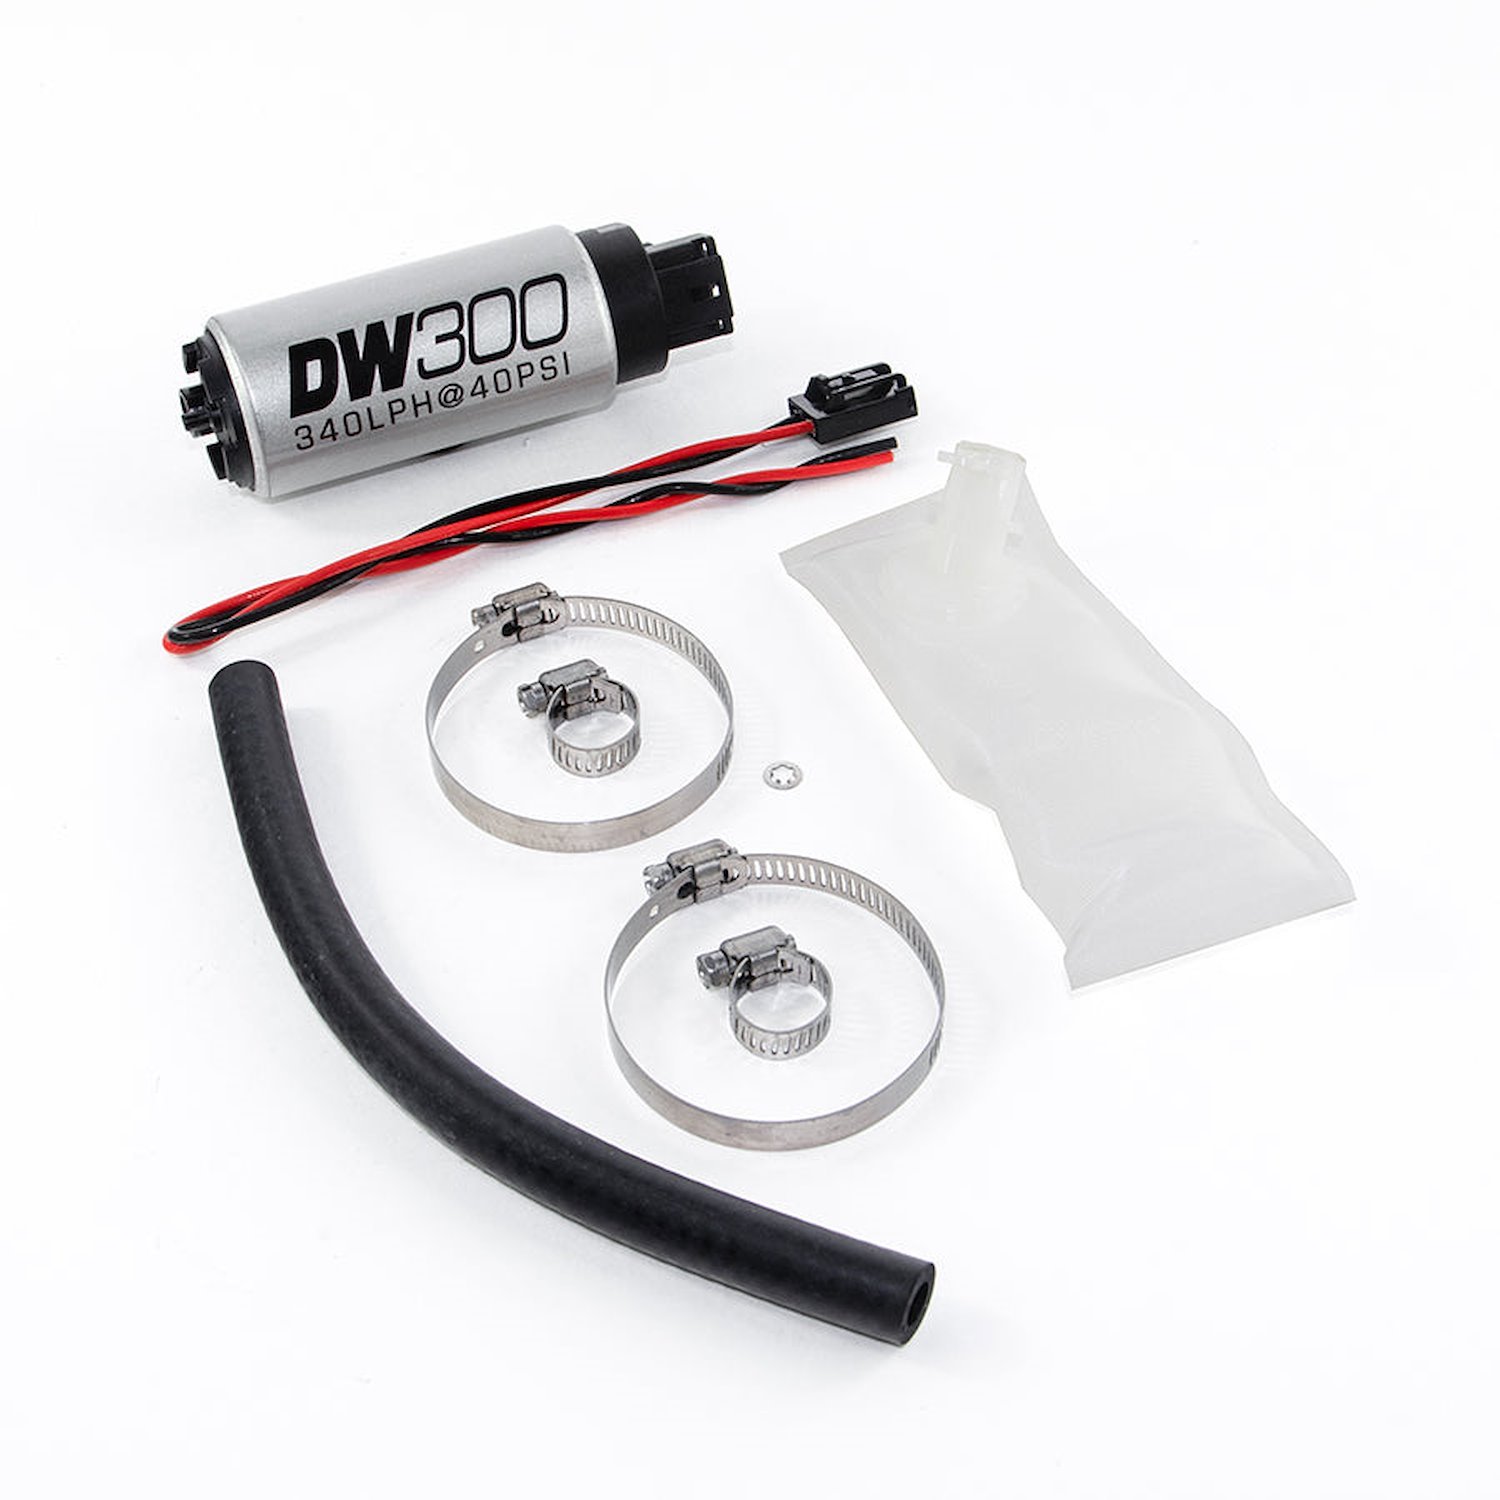 93011023 DW300 Series 340lph In-tank Fuel Pump w/ Install Kit for 89-05 Nissan